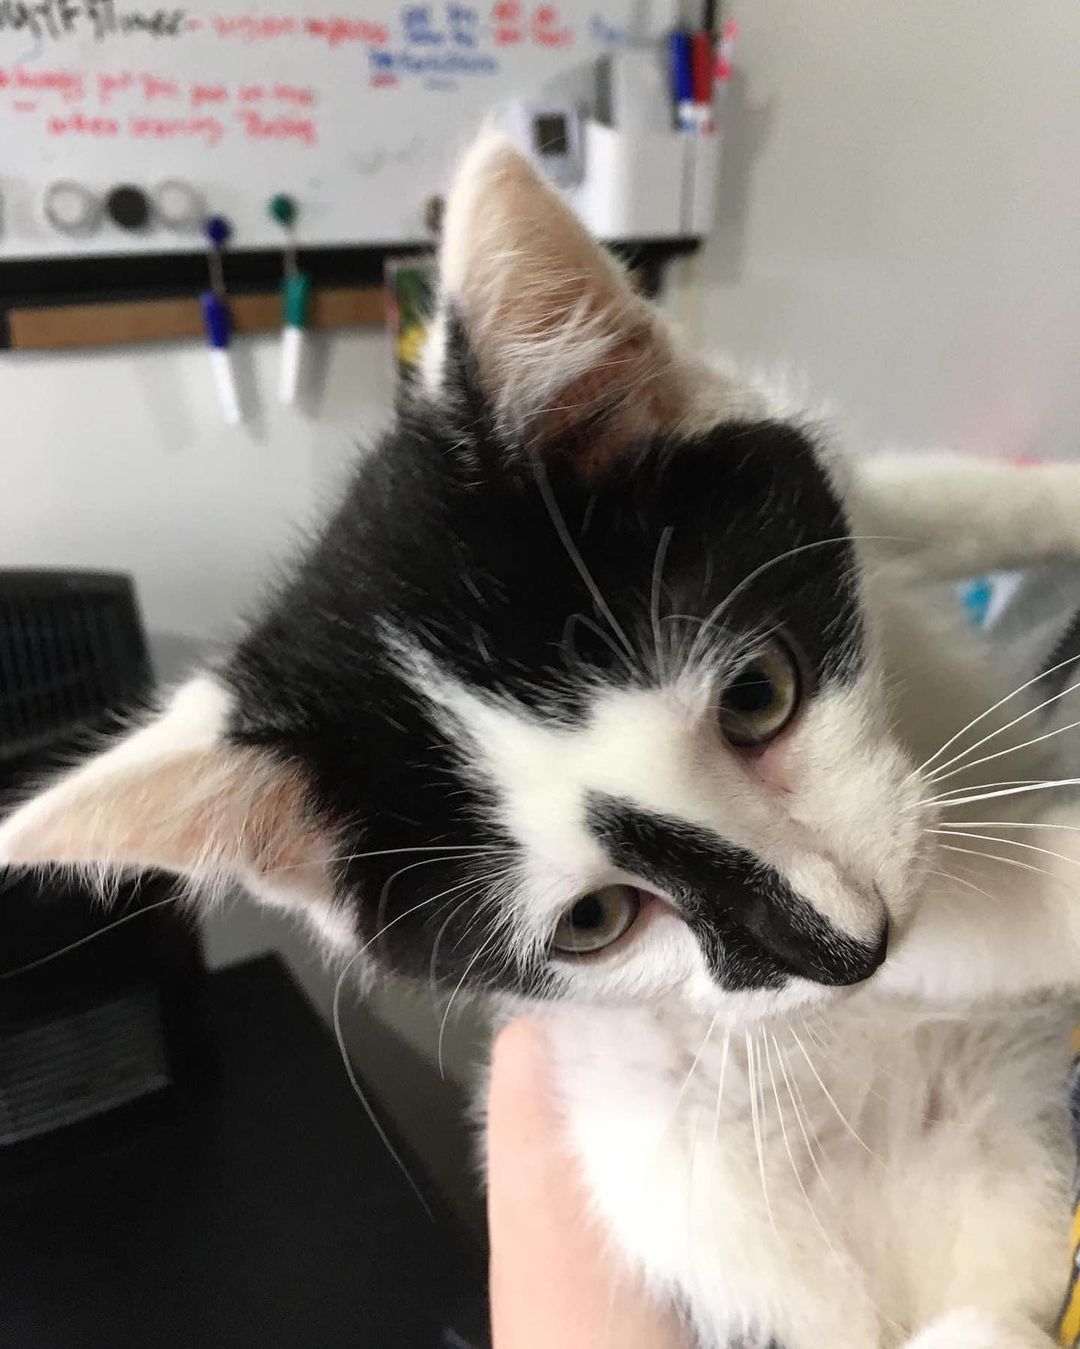 “Rory” is ready for adoption! This handsome boy is named for the Rorschach Ink Blot Test! Isn’t he handsome! 😻

Rory is a short hair, black and white male. His DOB is estimated at 8/10/2021. He loves to snuggle, but he’s also a busy guy, so let him wear himself out (maybe with a kitten playmate? Hint), or he’ll squirm free to continue his adventures! 😊

Rory tested negative for feline leukemia/FIV, fecal negative, treated for fleas and worms, and had his initial kitten vaccines. The balance of his vaccines and neuter, is included in our adoption plan. 

Please fill out an adoption application for Rory 😻

<a target='_blank' href='https://www.instagram.com/explore/tags/adoptdontshop/'>#adoptdontshop</a> <a target='_blank' href='https://www.instagram.com/explore/tags/cats/'>#cats</a> <a target='_blank' href='https://www.instagram.com/explore/tags/catsofinstagram/'>#catsofinstagram</a> <a target='_blank' href='https://www.instagram.com/explore/tags/cats_of_instagram/'>#cats_of_instagram</a> <a target='_blank' href='https://www.instagram.com/explore/tags/ashlandohio/'>#ashlandohio</a>